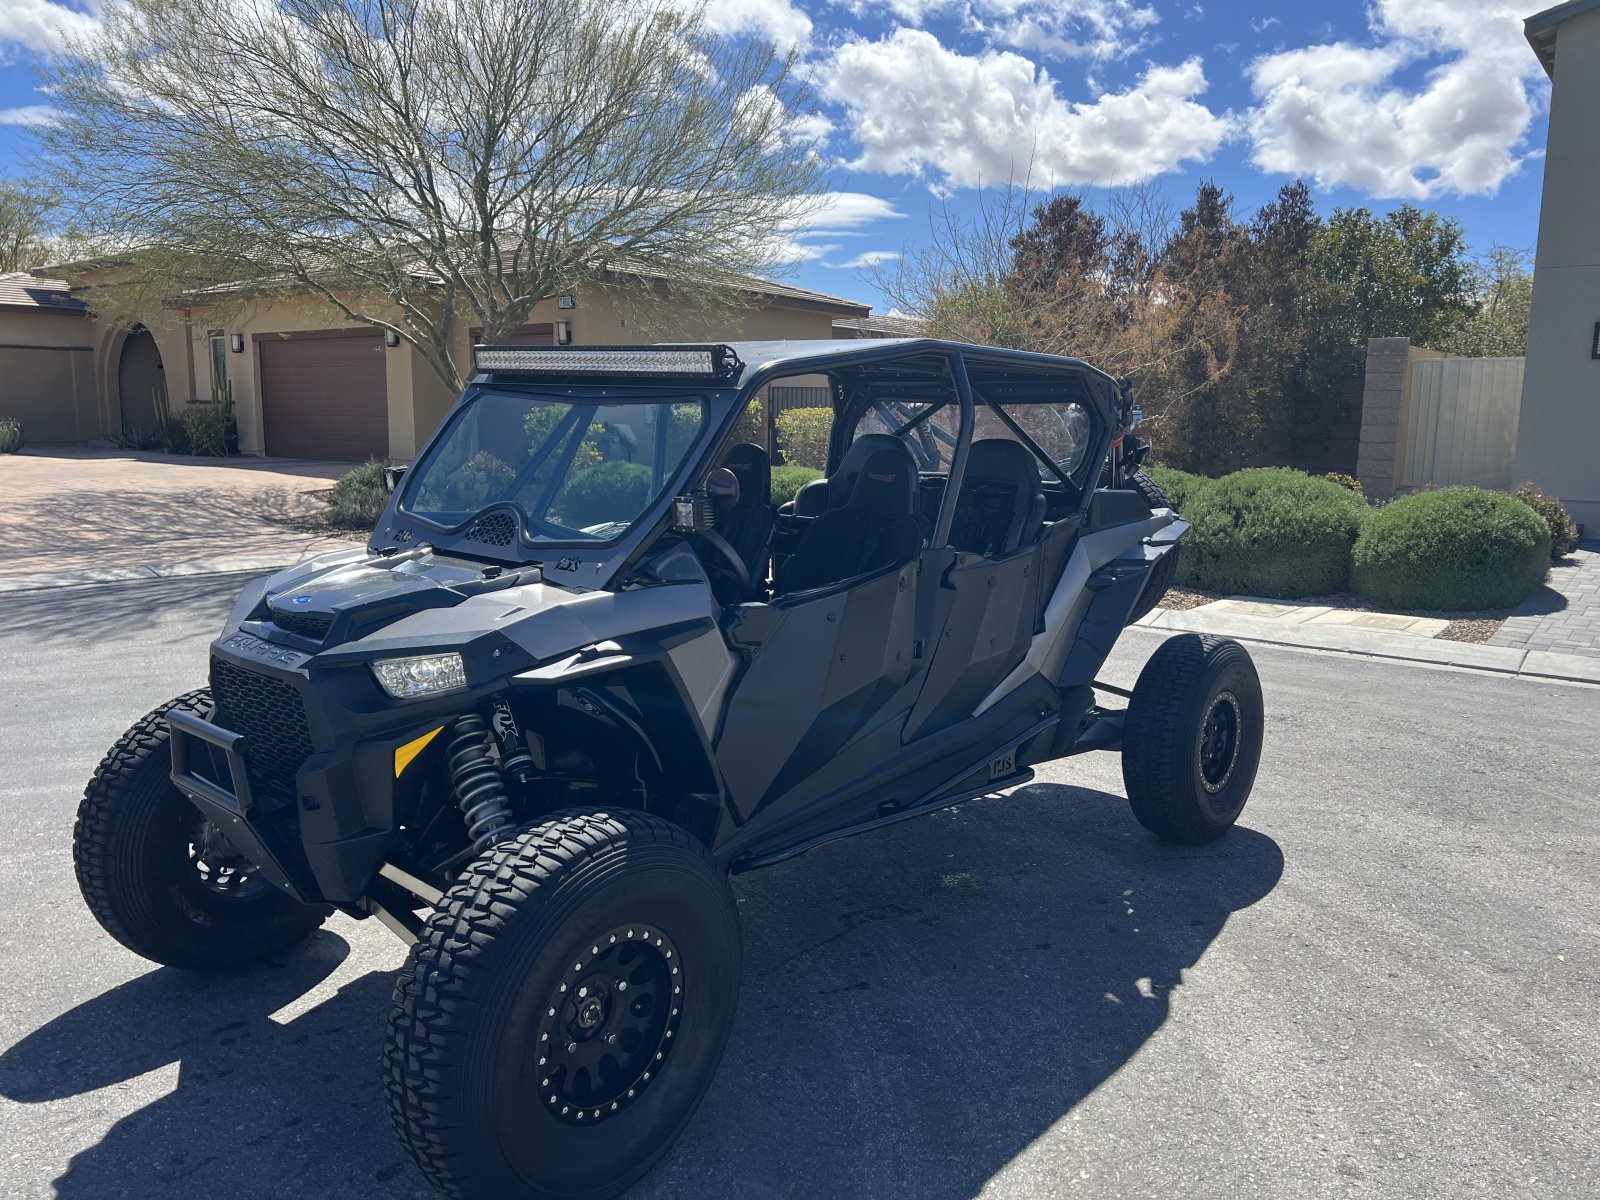 For Sale: 2017 Polaris RZR XP 4 Turbo with 1825 miles 79 hours- freshly serviced.  - photo0